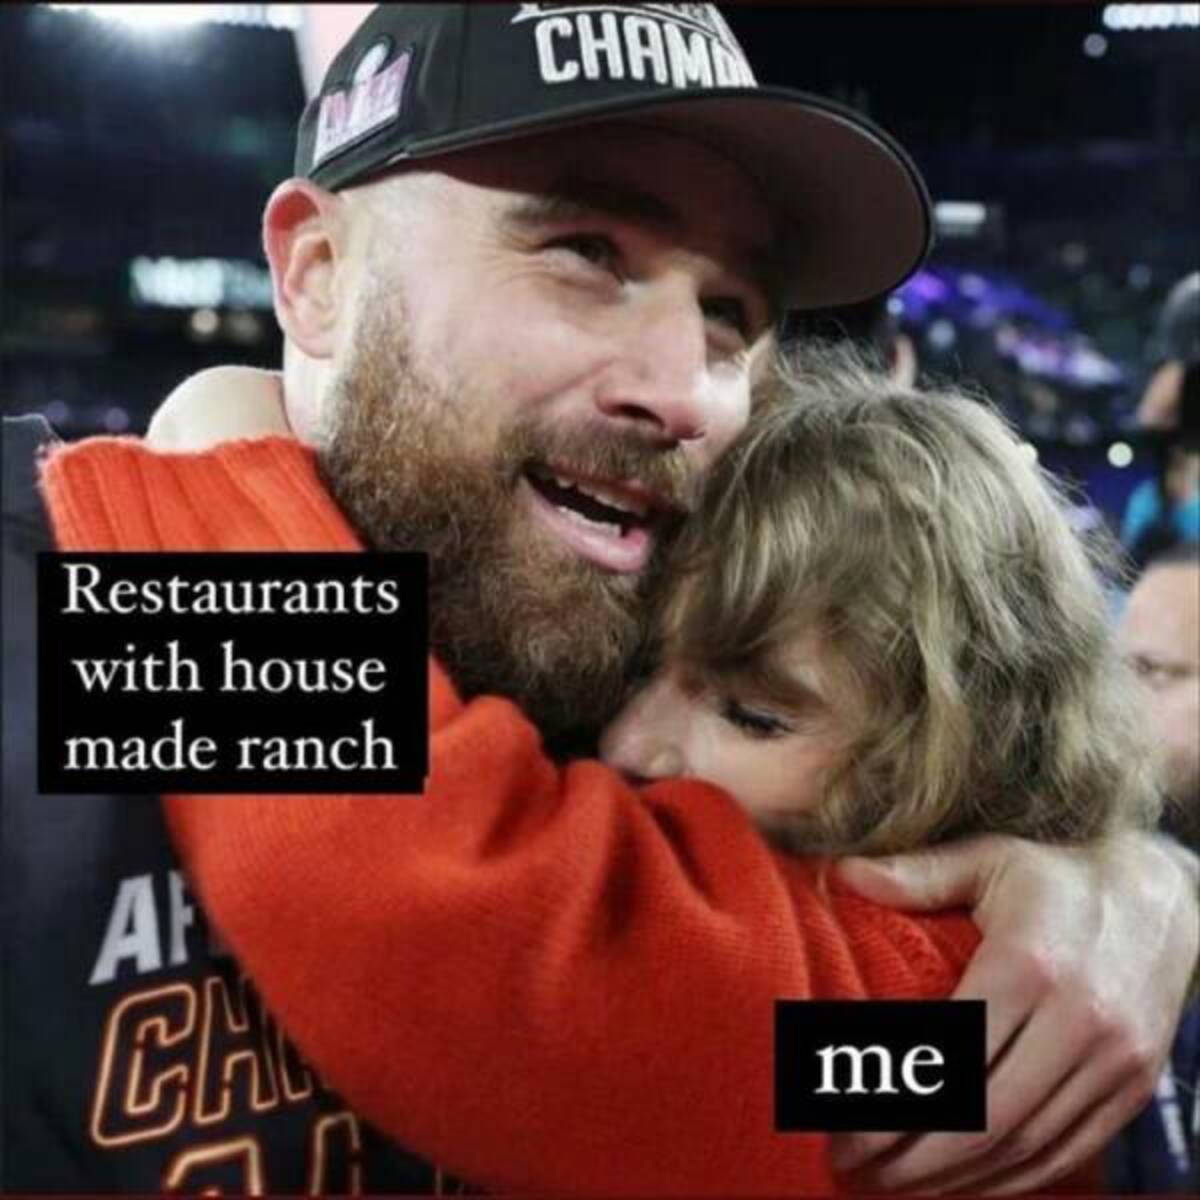 beard - Restaurants with house made ranch A Ch A 0 Cham me